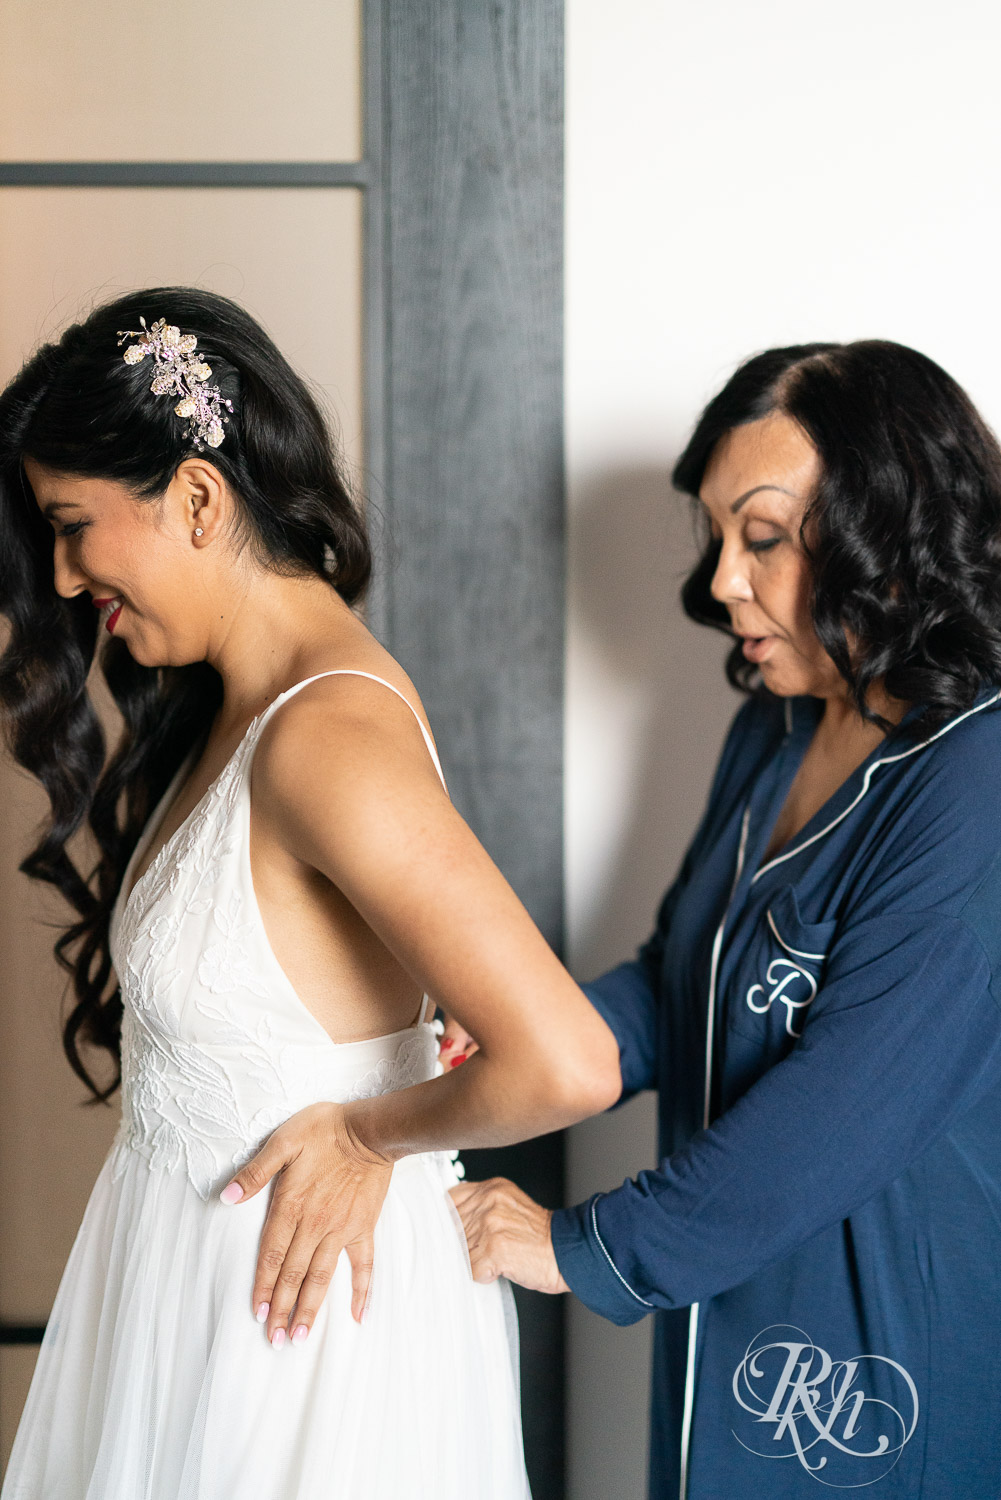 Mom buttoning bride into her wedding dress on her wedding day in Minneapolis, Minnesota.